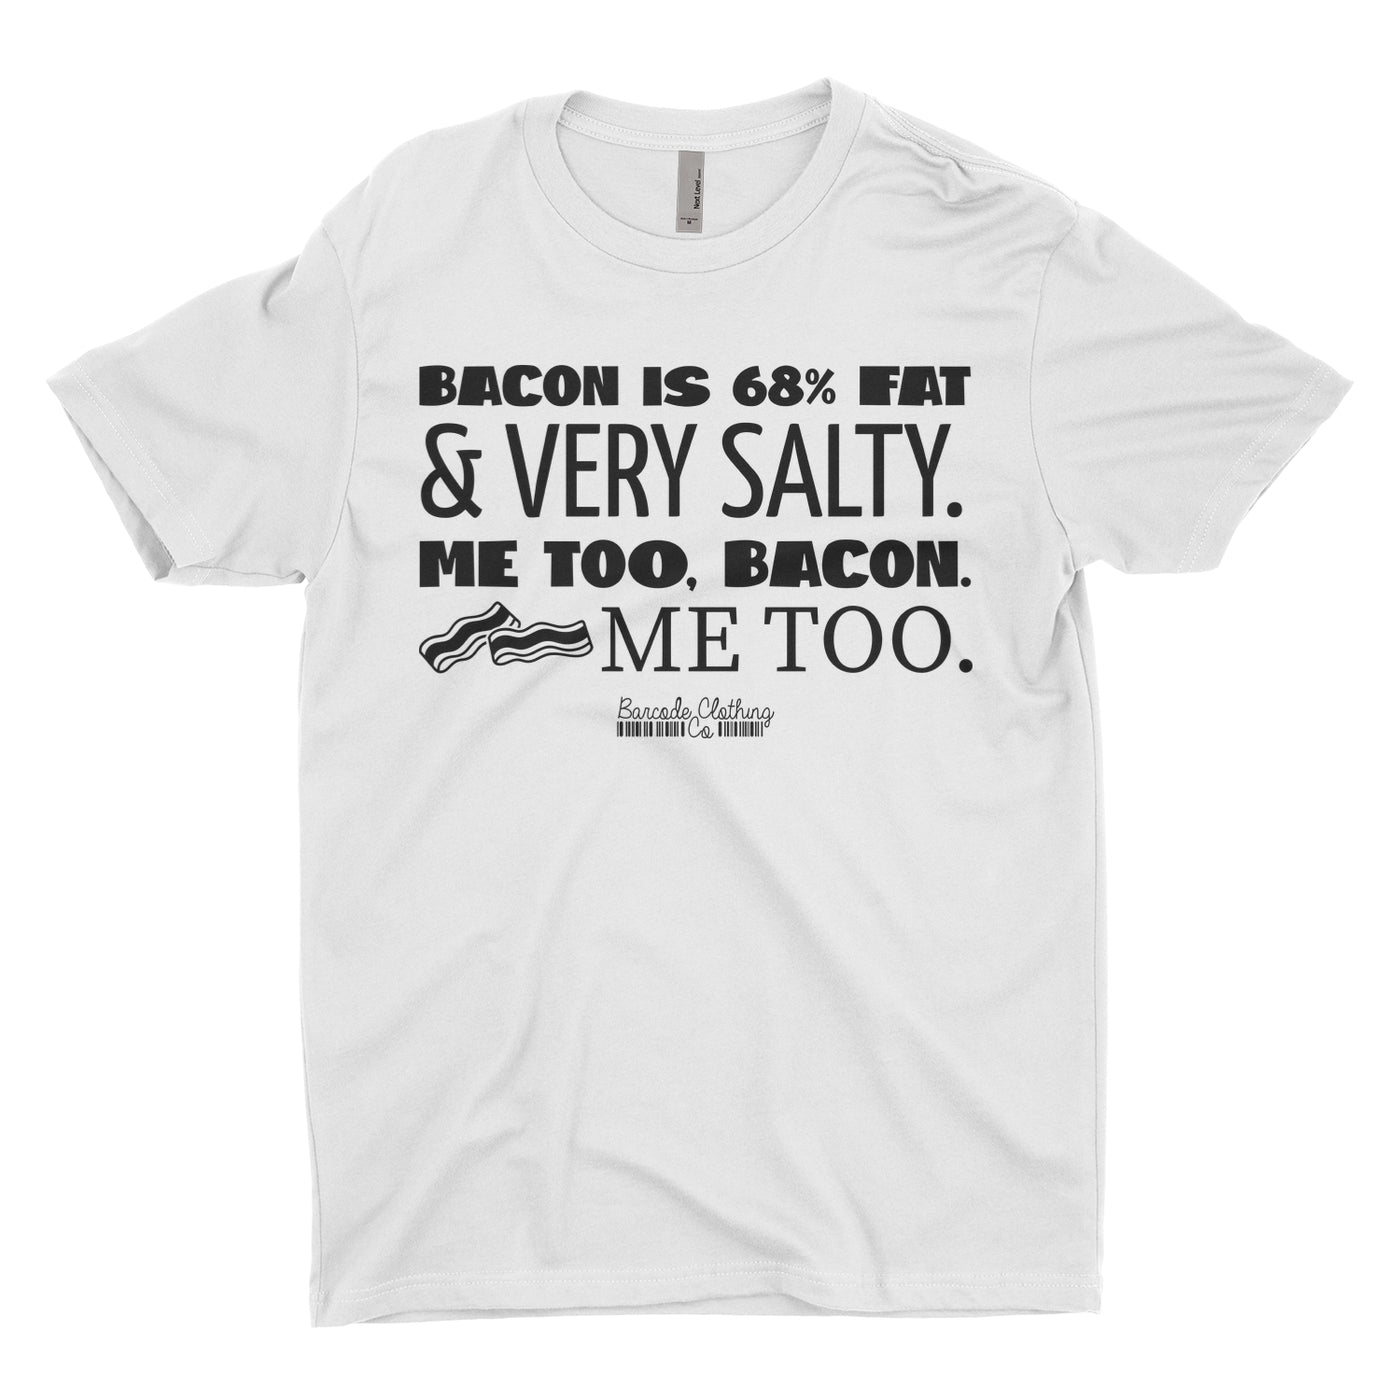 Bacon Salty Blacked Out